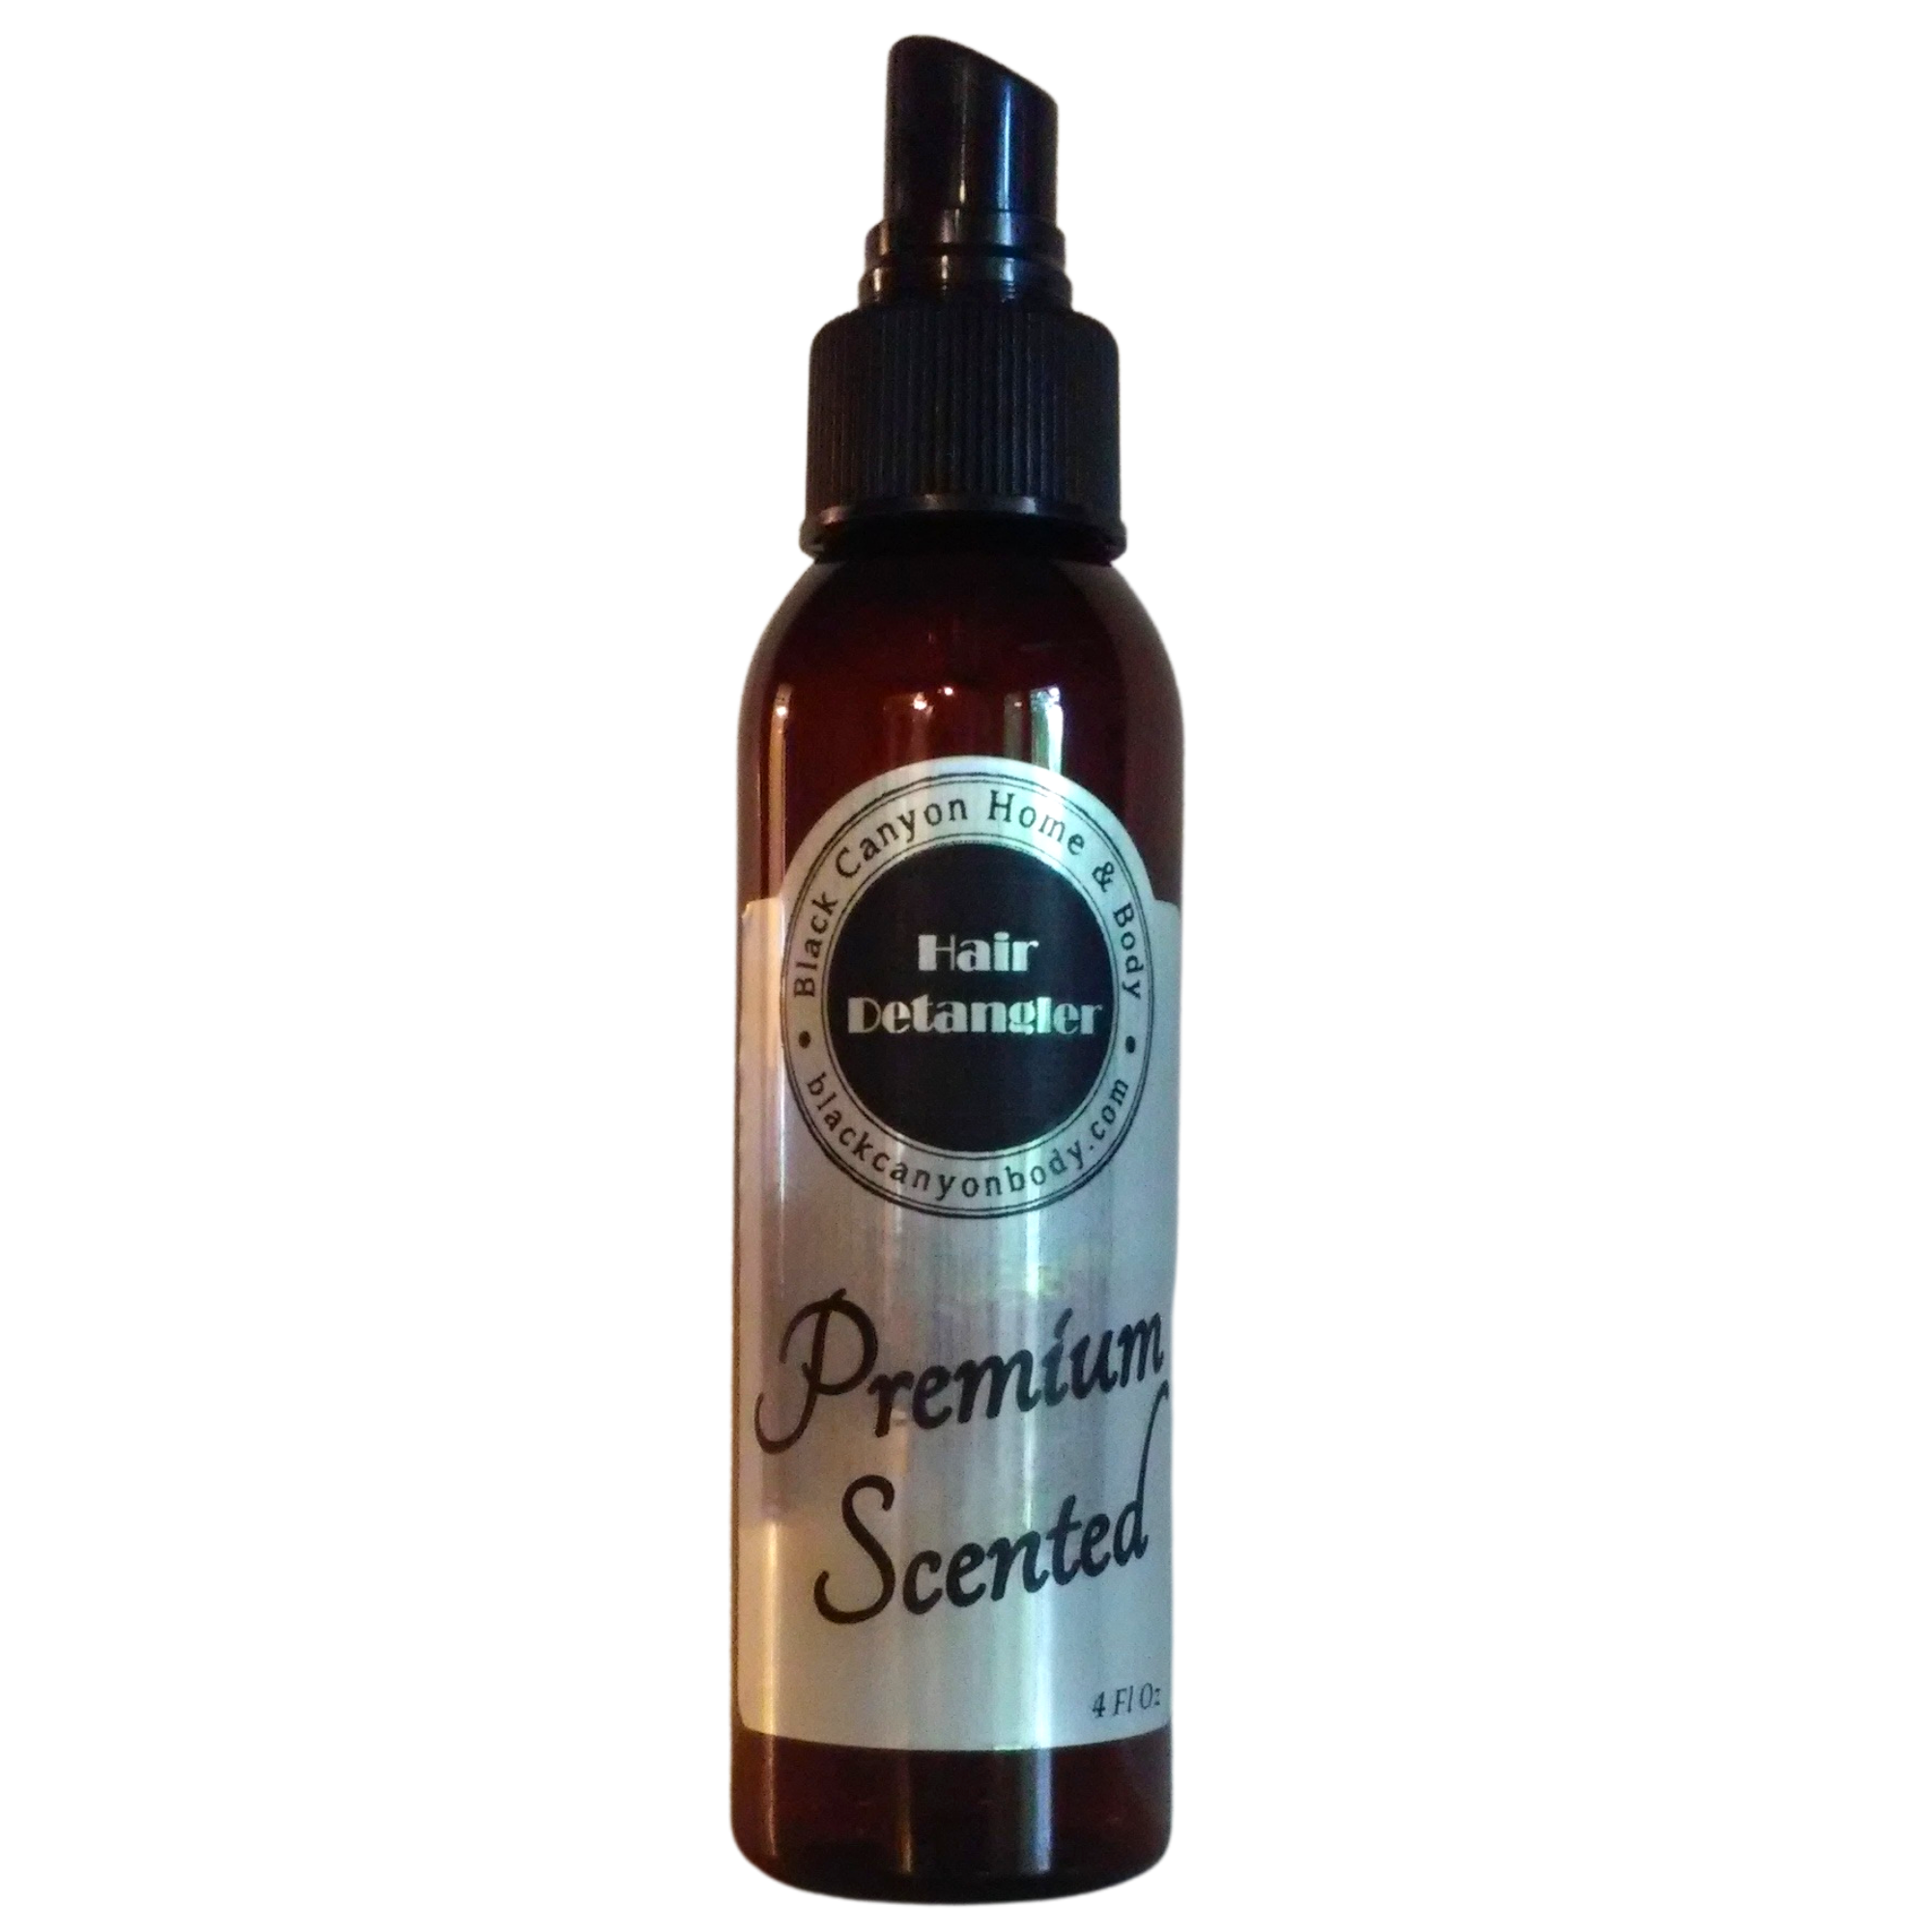 Black Canyon Berries & Cream Scented Hair Detangler Spray with Olive Oil